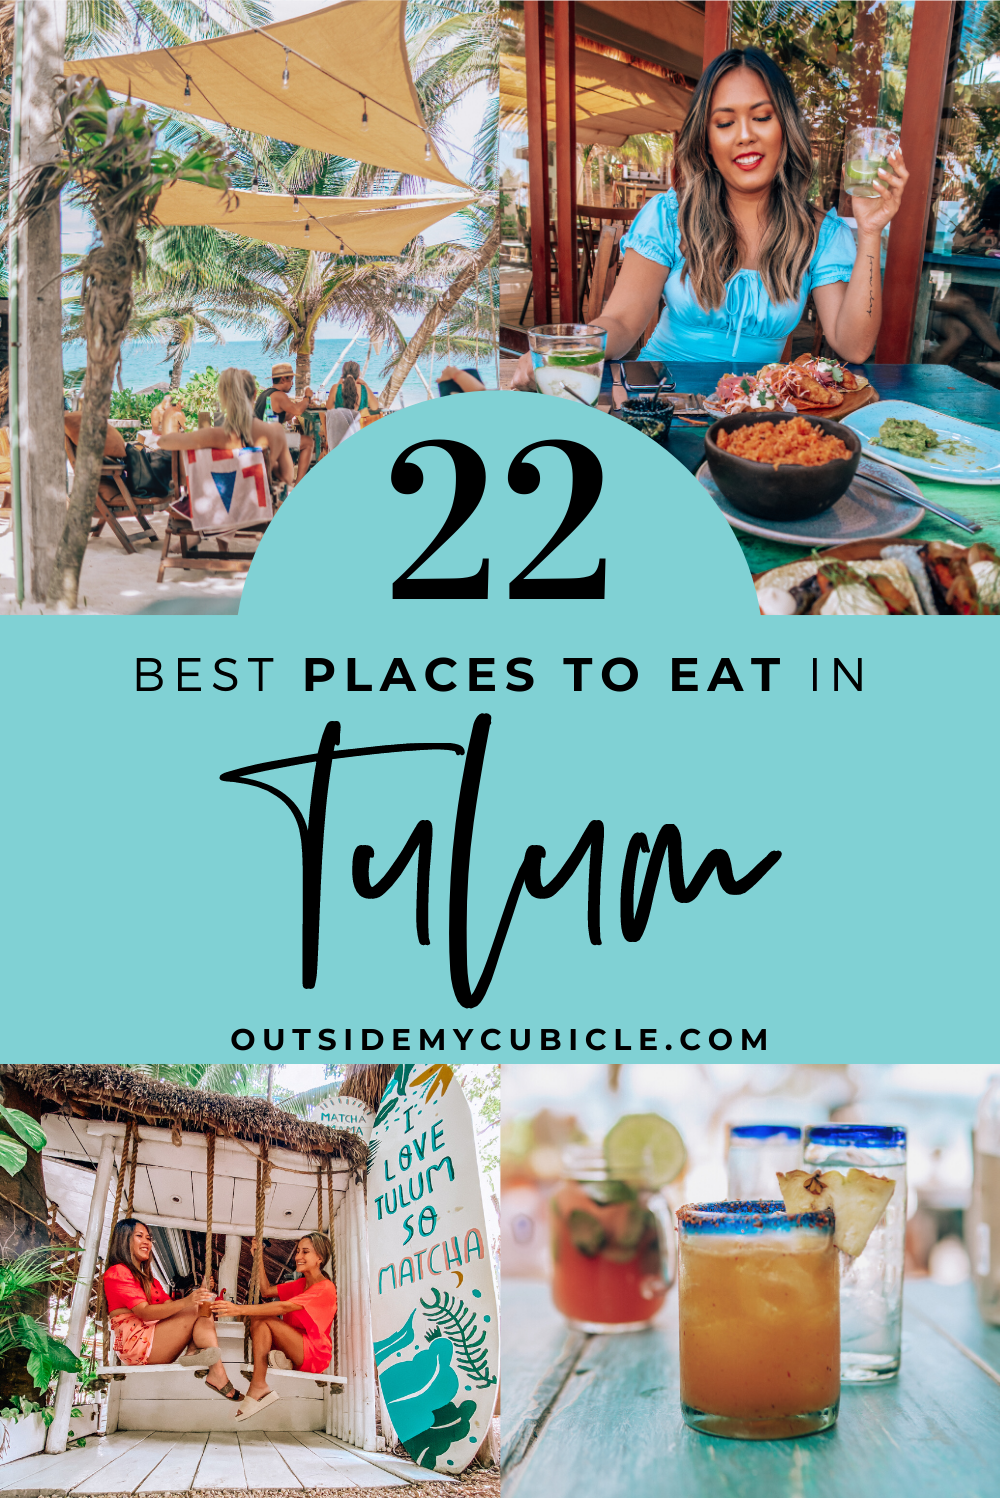 Best places to eat in Tulum